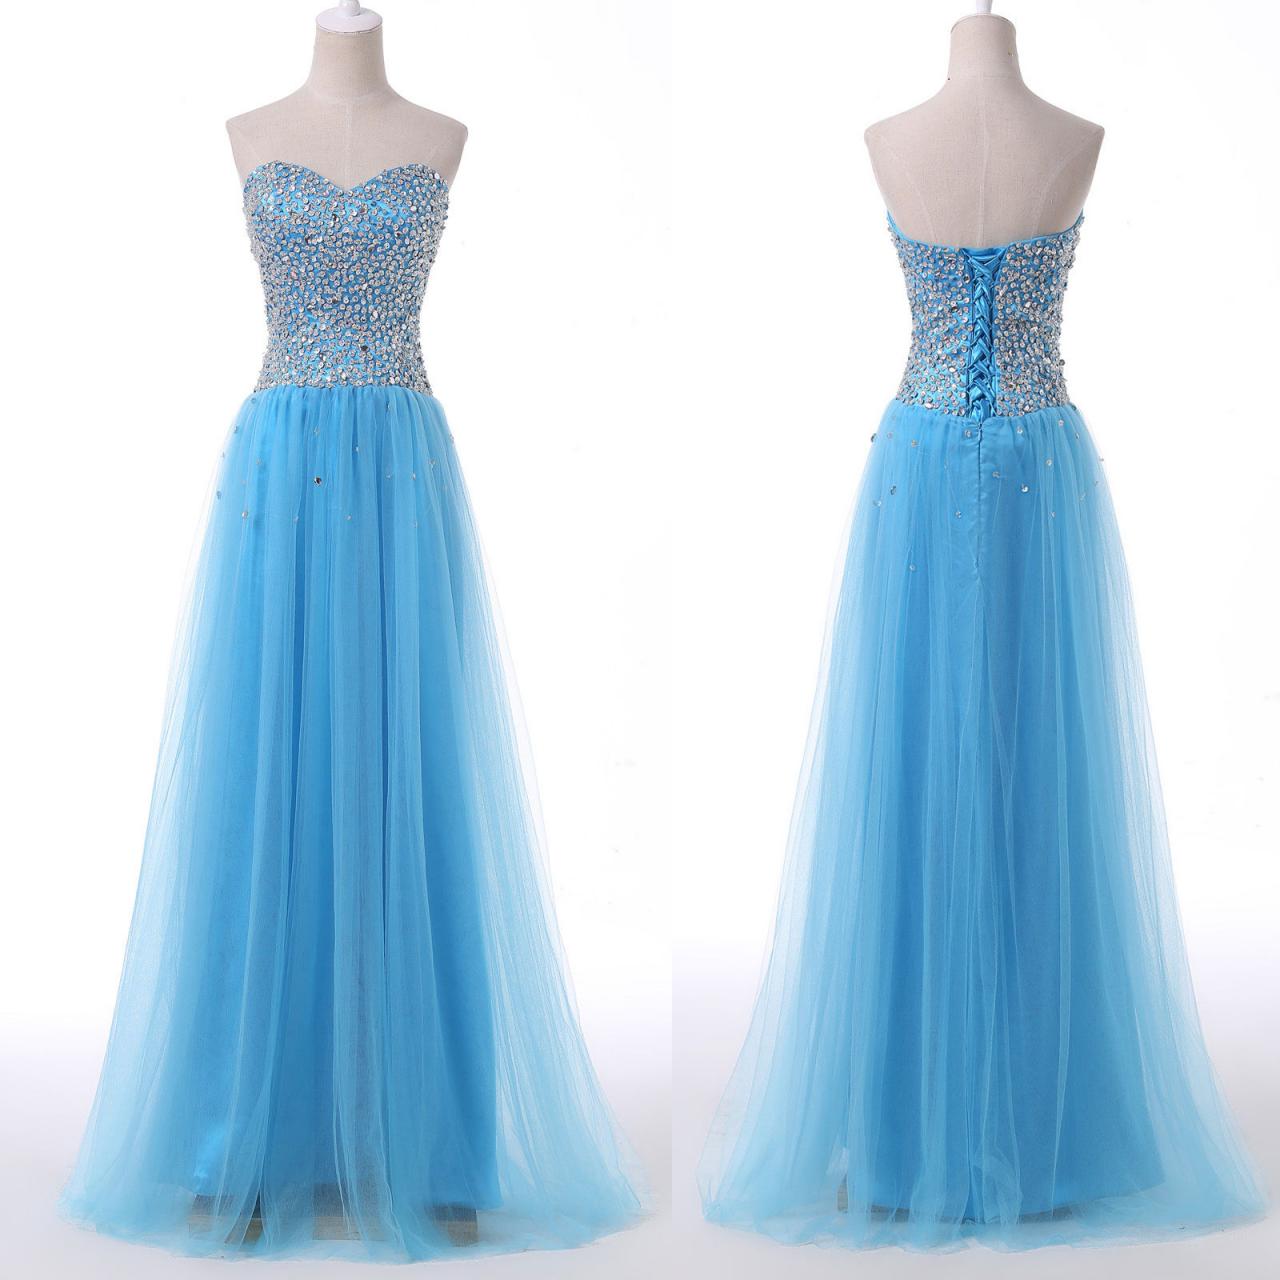 Blue Sequin Long Prom Dress, Formal Evening Dress, Custom Made Formal Prom Gowns